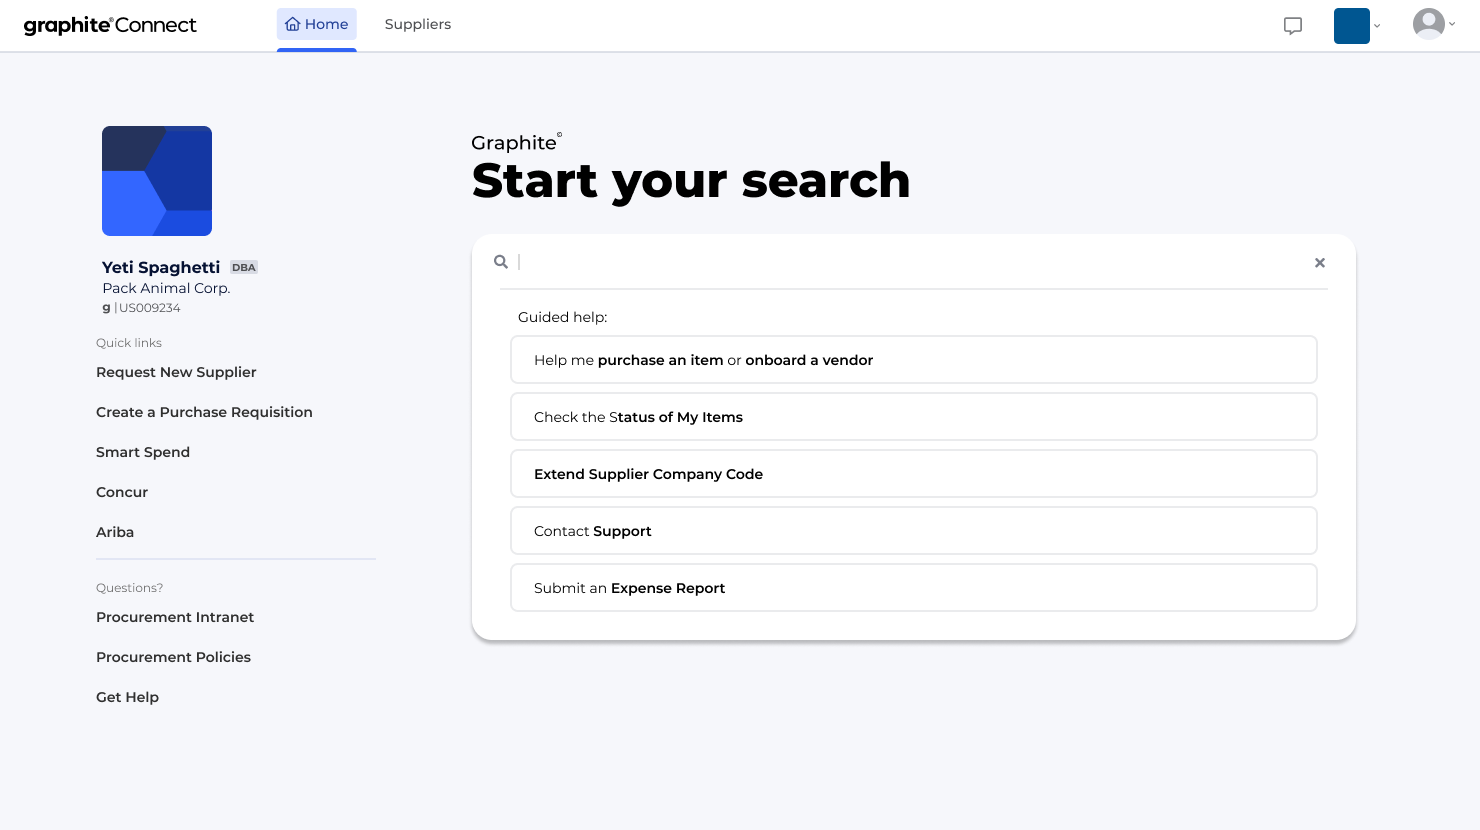 Use Graphite's guided search to find new suppliers or perform other tasks.